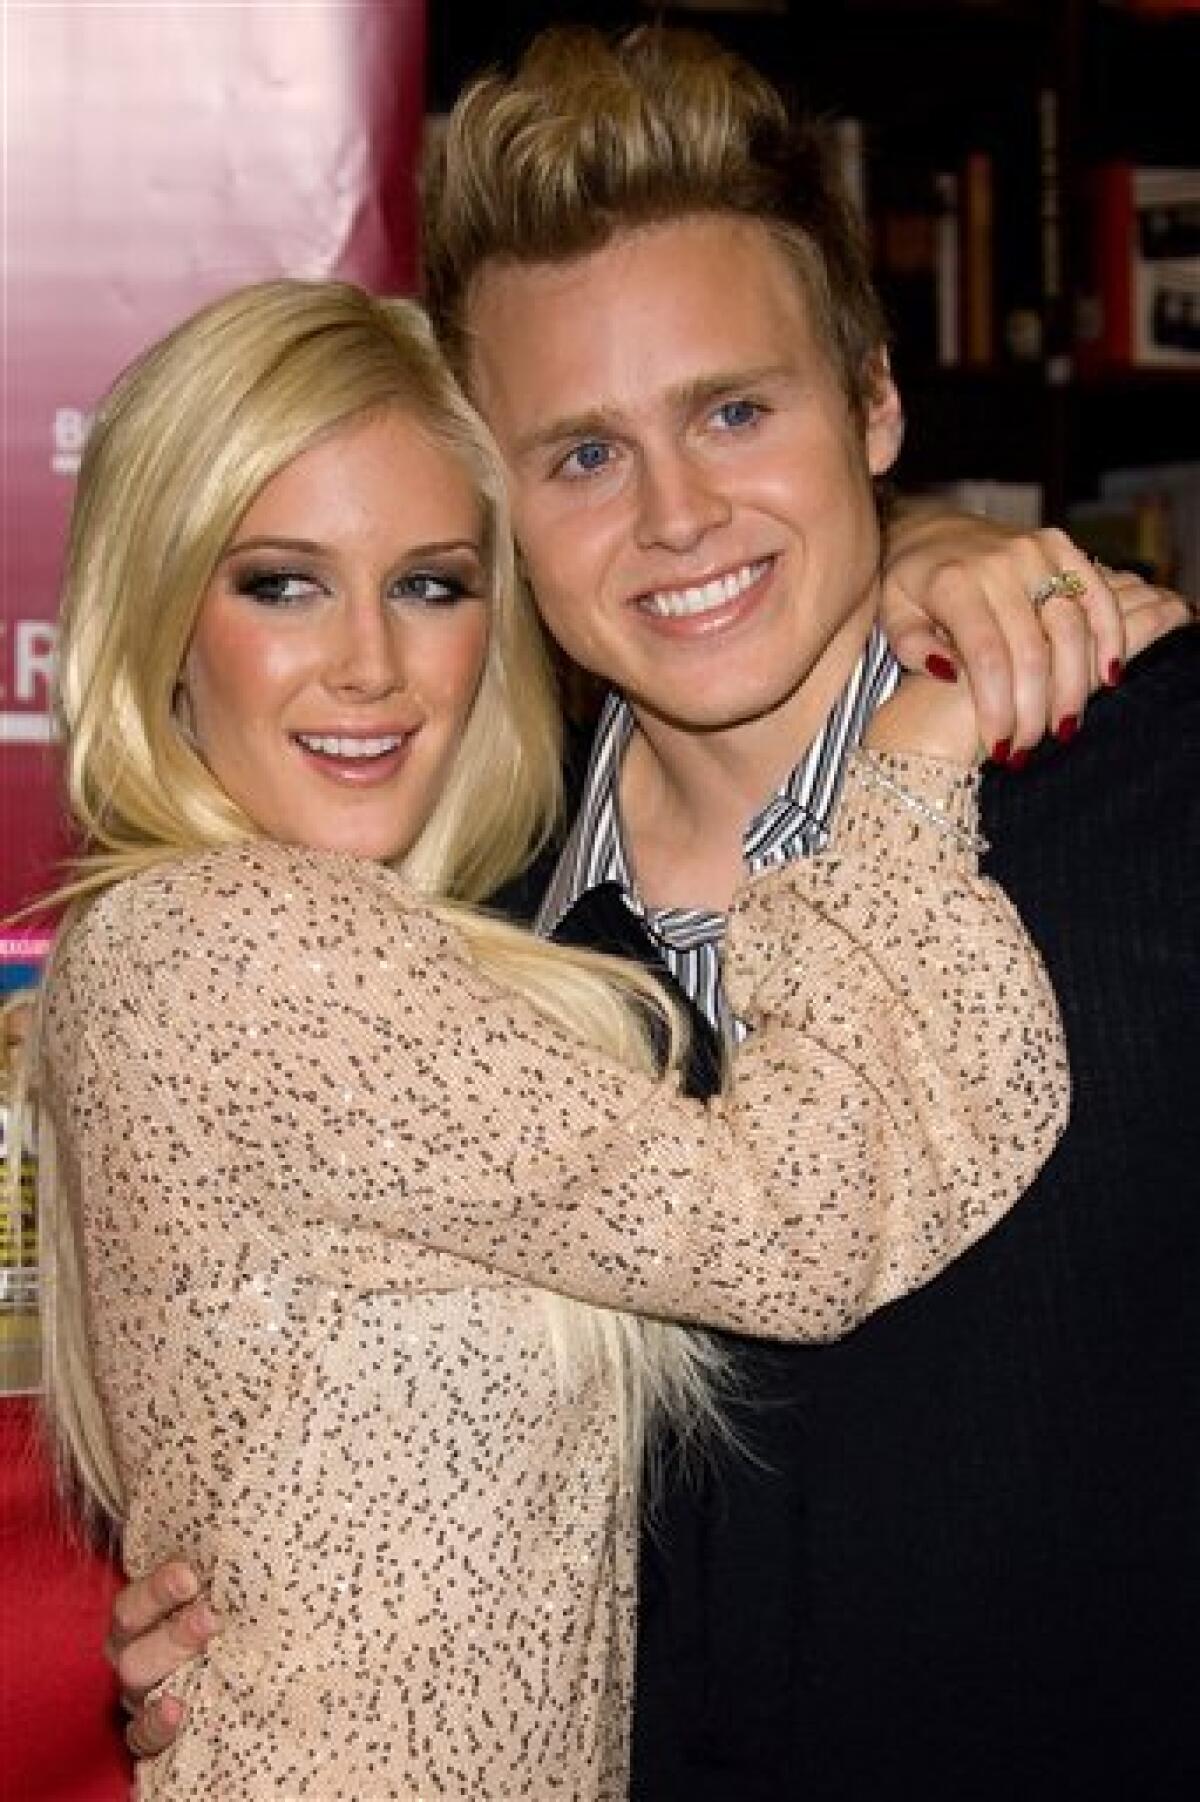 FILE - In this Nov. 16, 2009 file photo, Heidi Montag, left, and Spencer Pratt pose at a book signing event for their book "How To Be Famous" at Borders Books in New York. (AP Photo/Charles Sykes, file)